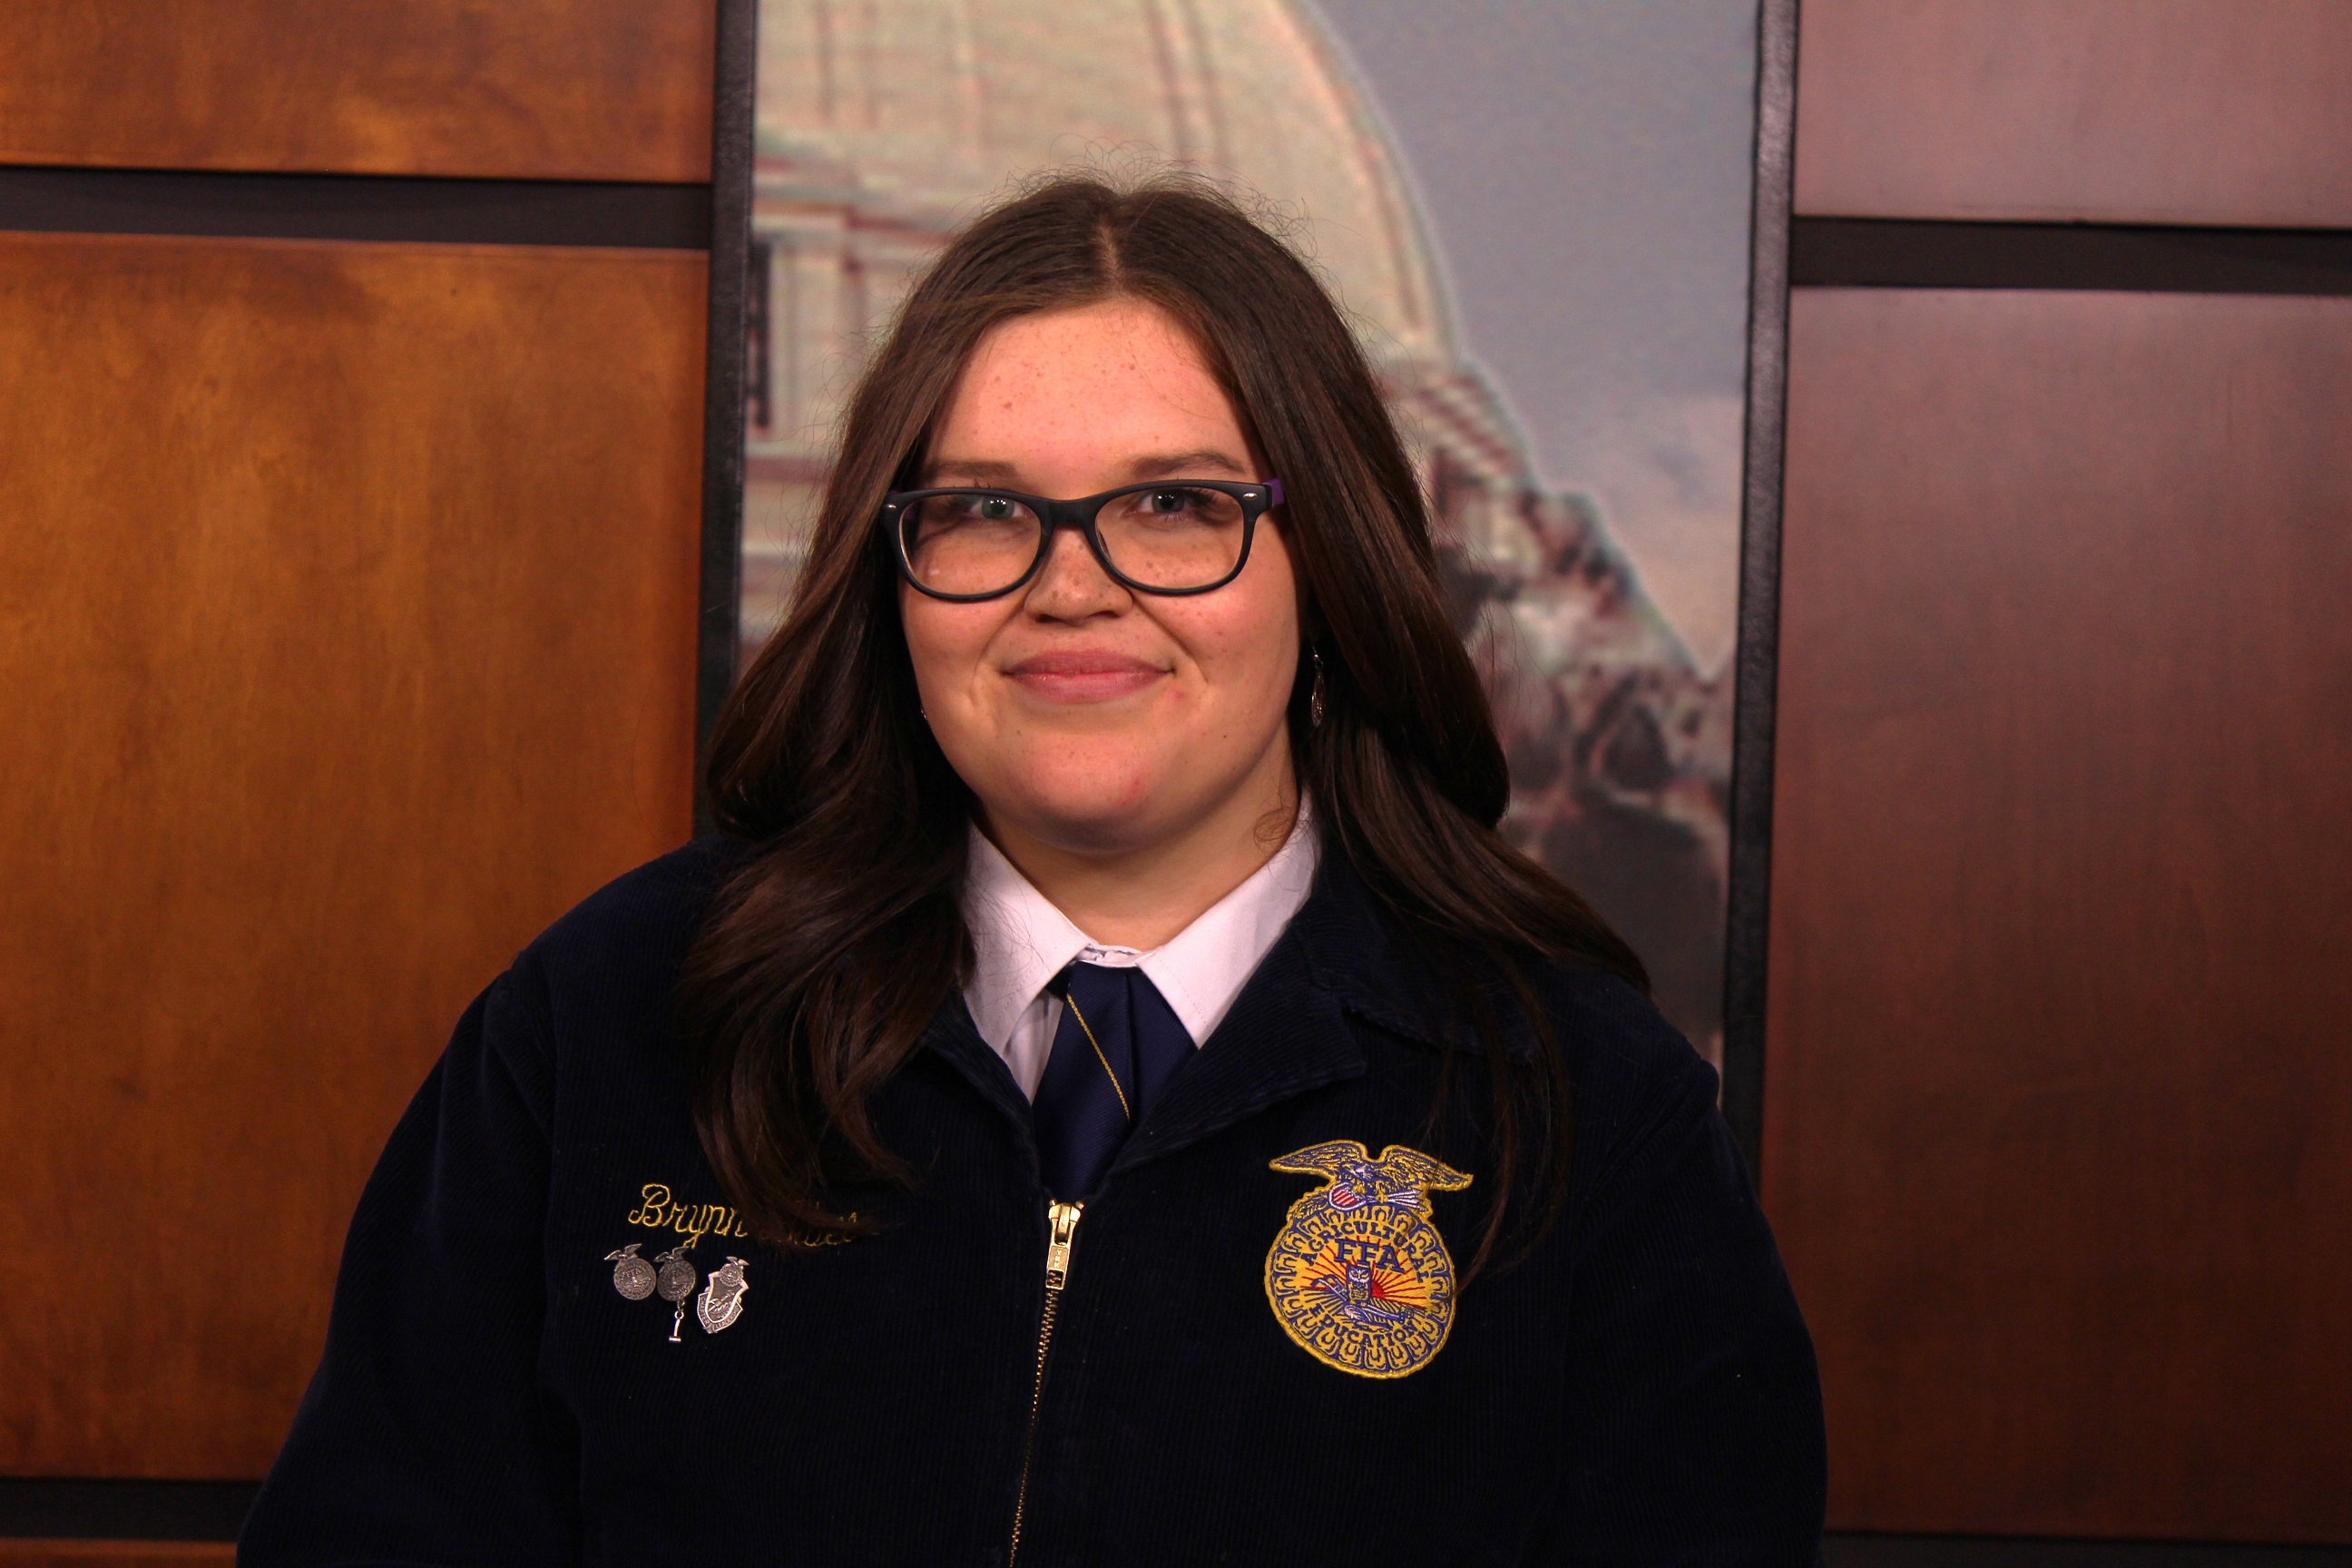 Introducing Brynn Bibee of the Stigler FFA Chapter, Your 2022 Southeast Area Star in Agribusiness